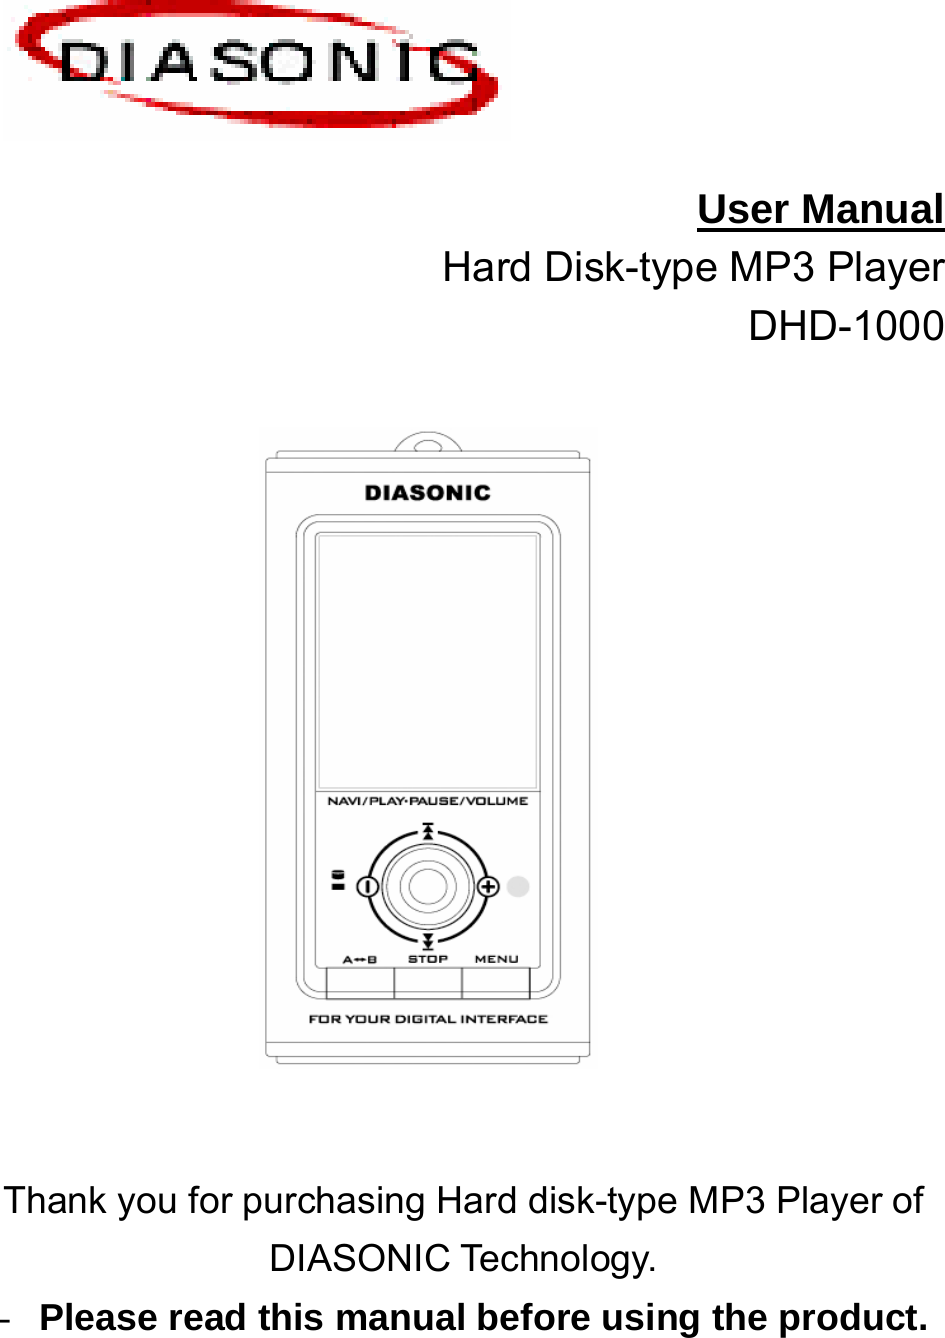   User Manual Hard Disk-type MP3 Player                                 DHD-1000                             Thank you for purchasing Hard disk-type MP3 Player of DIASONIC Technology.   - Please read this manual before using the product.  